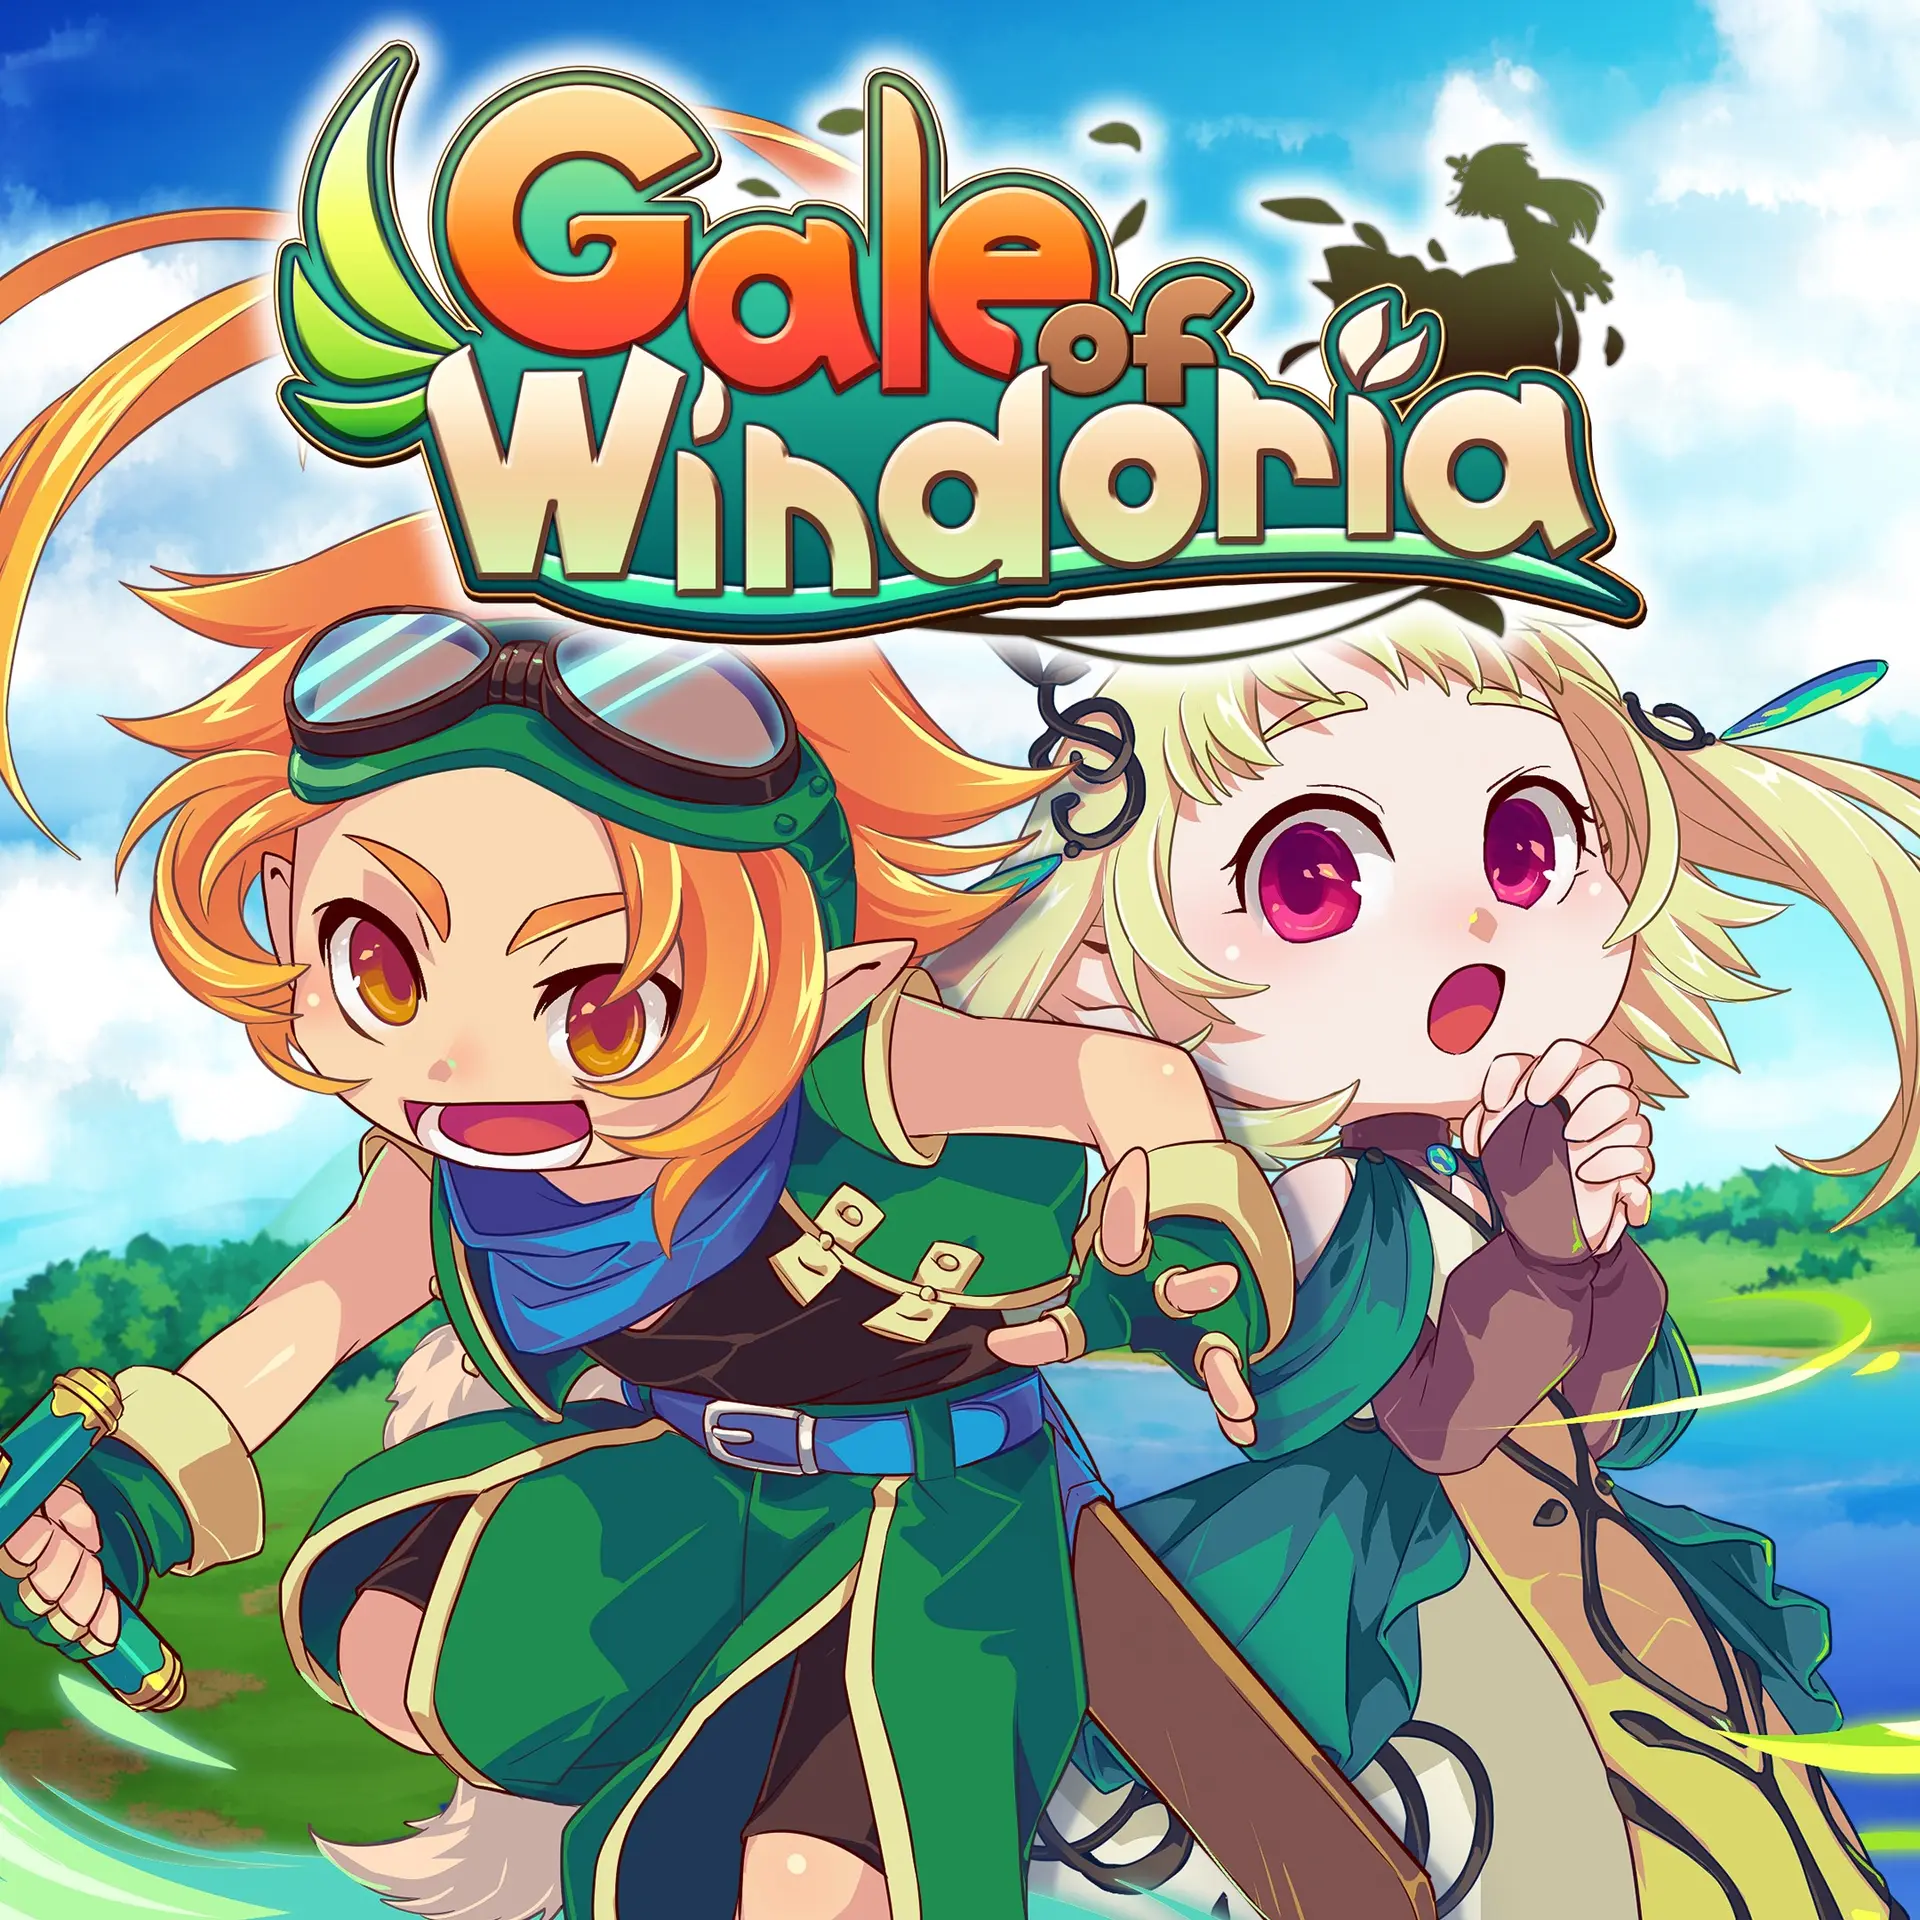 Gale of Windoria (XBOX One - Cheapest Store)